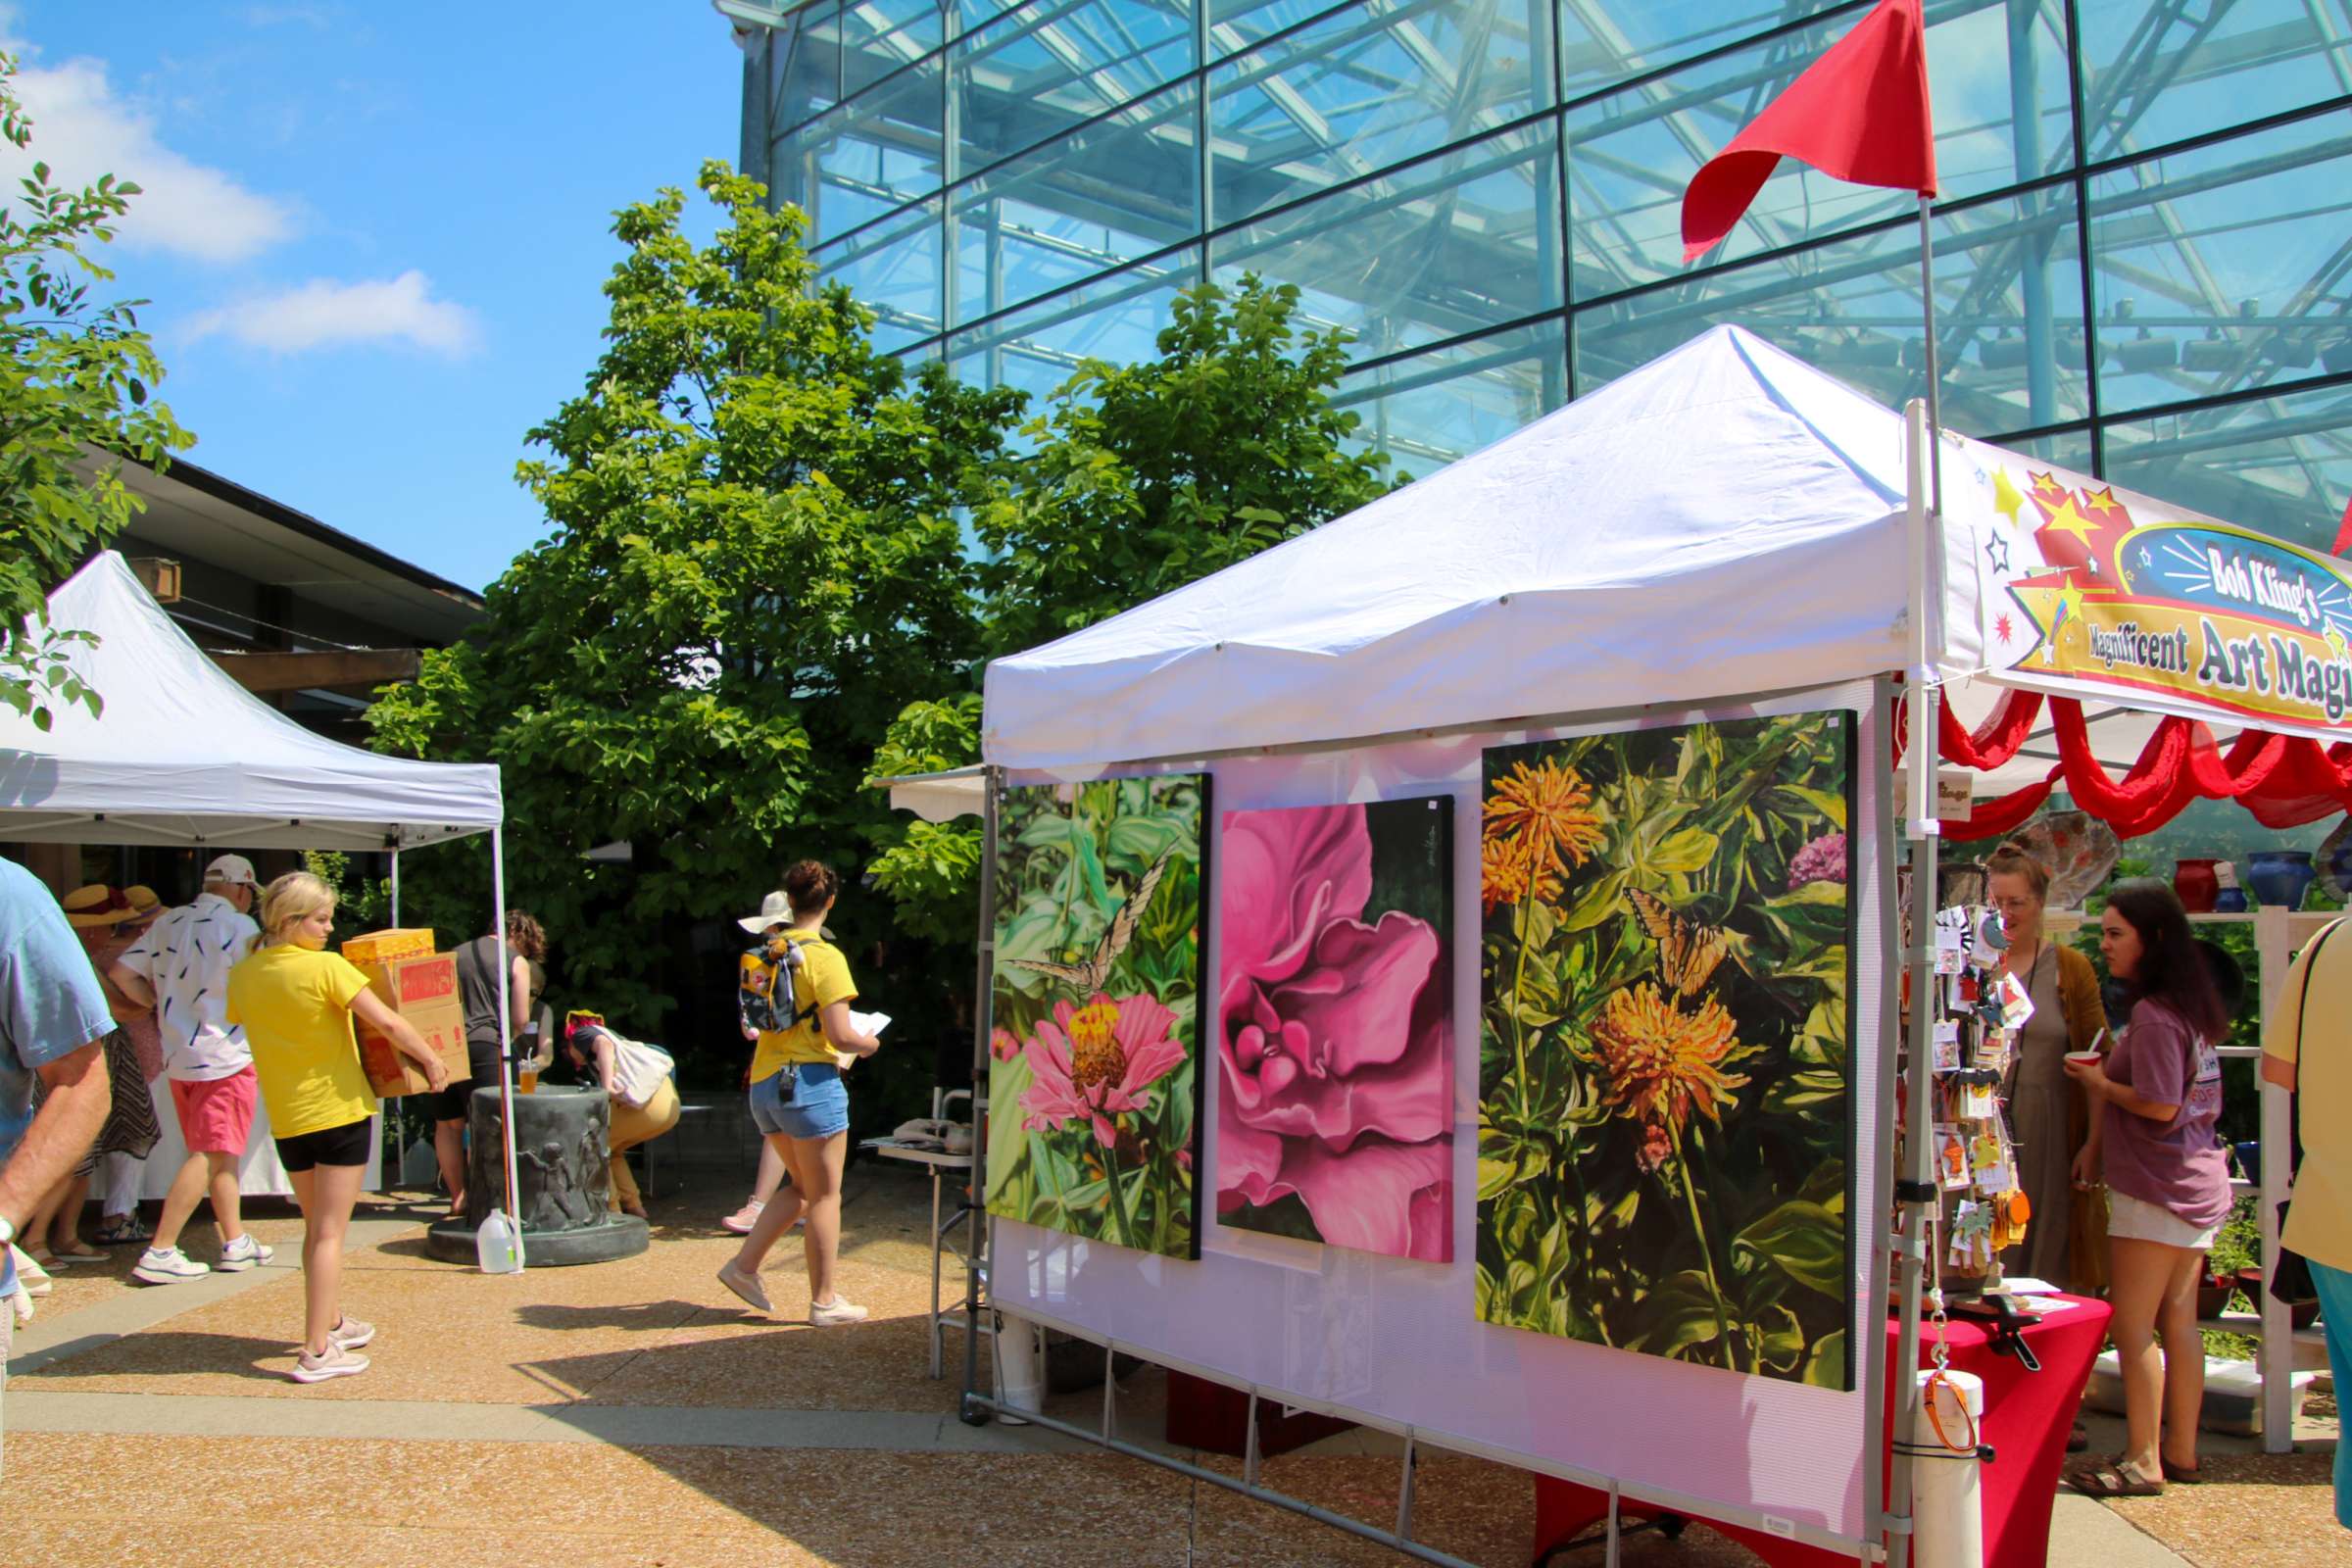 Tents are set up and decorated with wares to be sold at the Garden Art Fair.